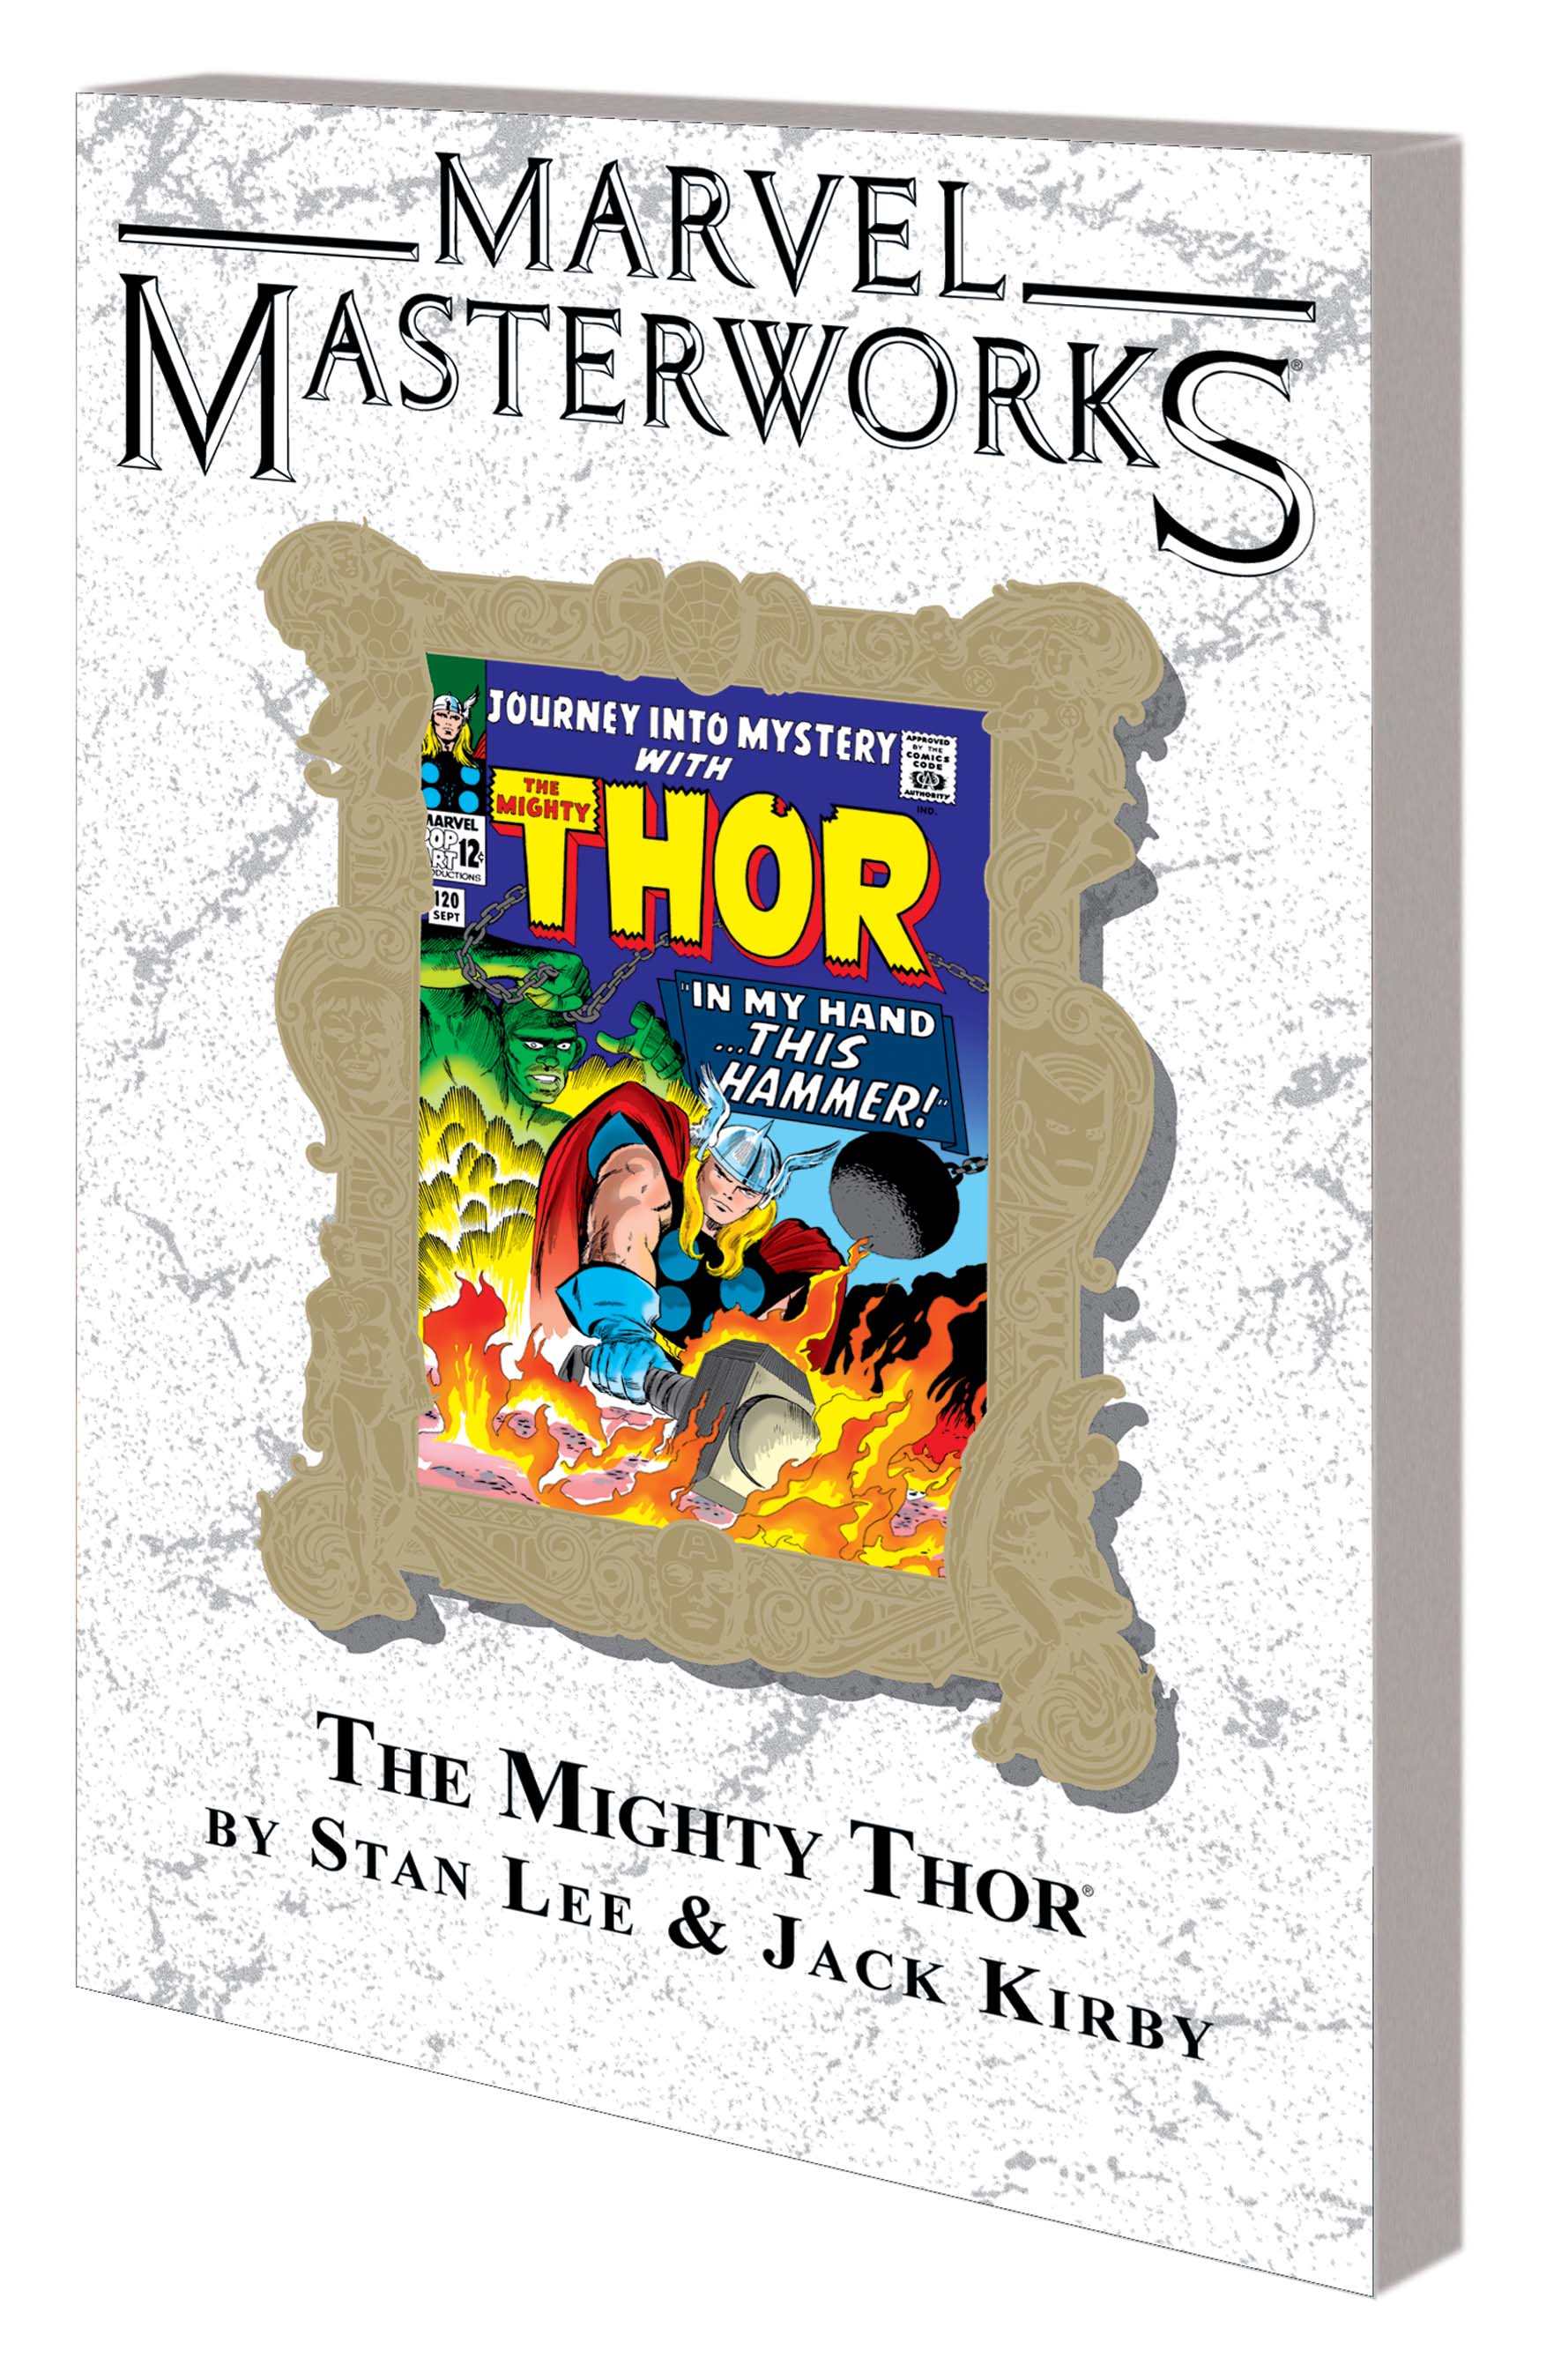 Marvel Masterworks: The Mighty Thor Vol. 3 Variant (DM Only) (Trade Paperback)